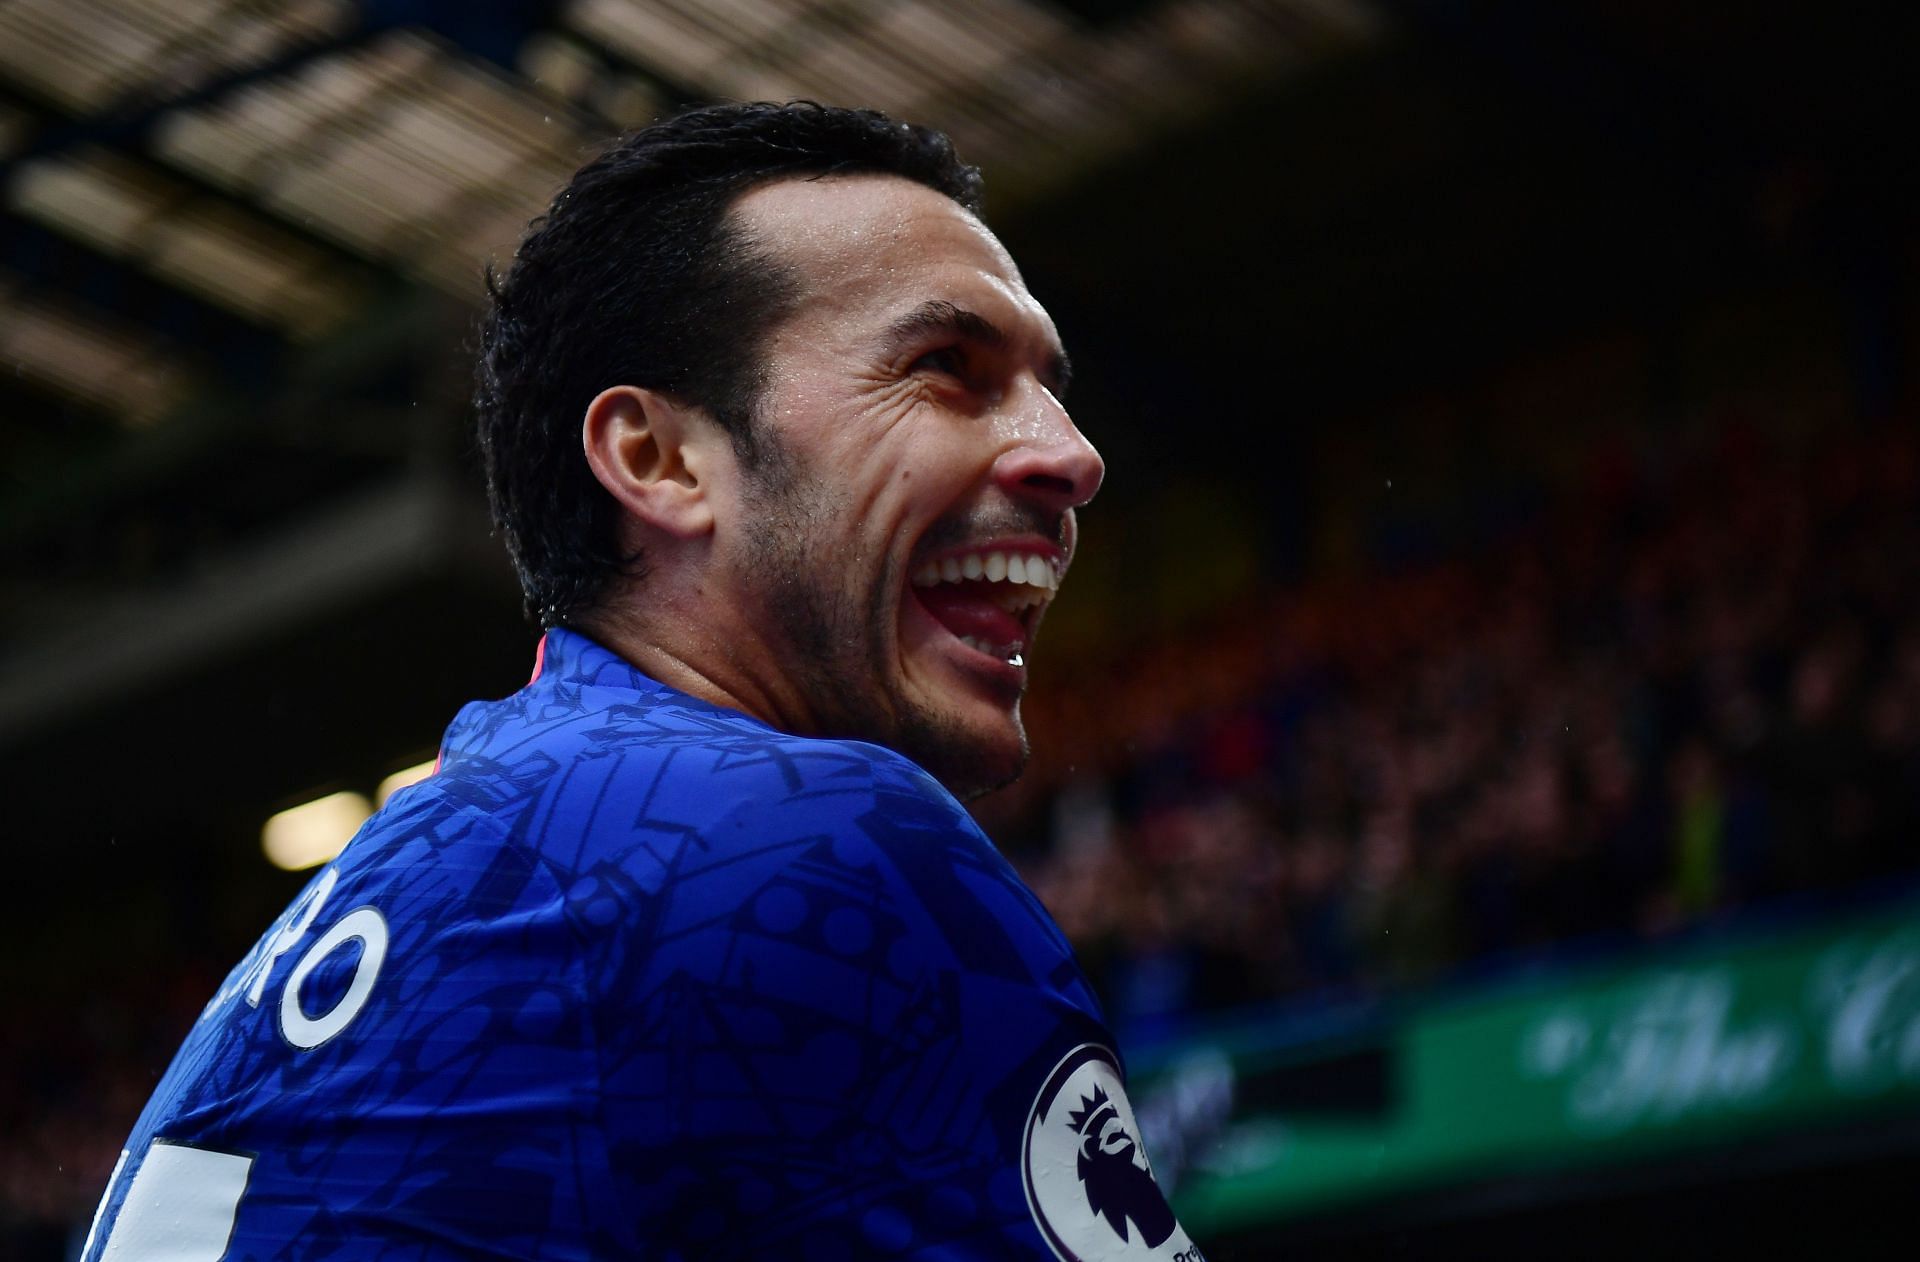 Pedro scored 43 goals for the Blues